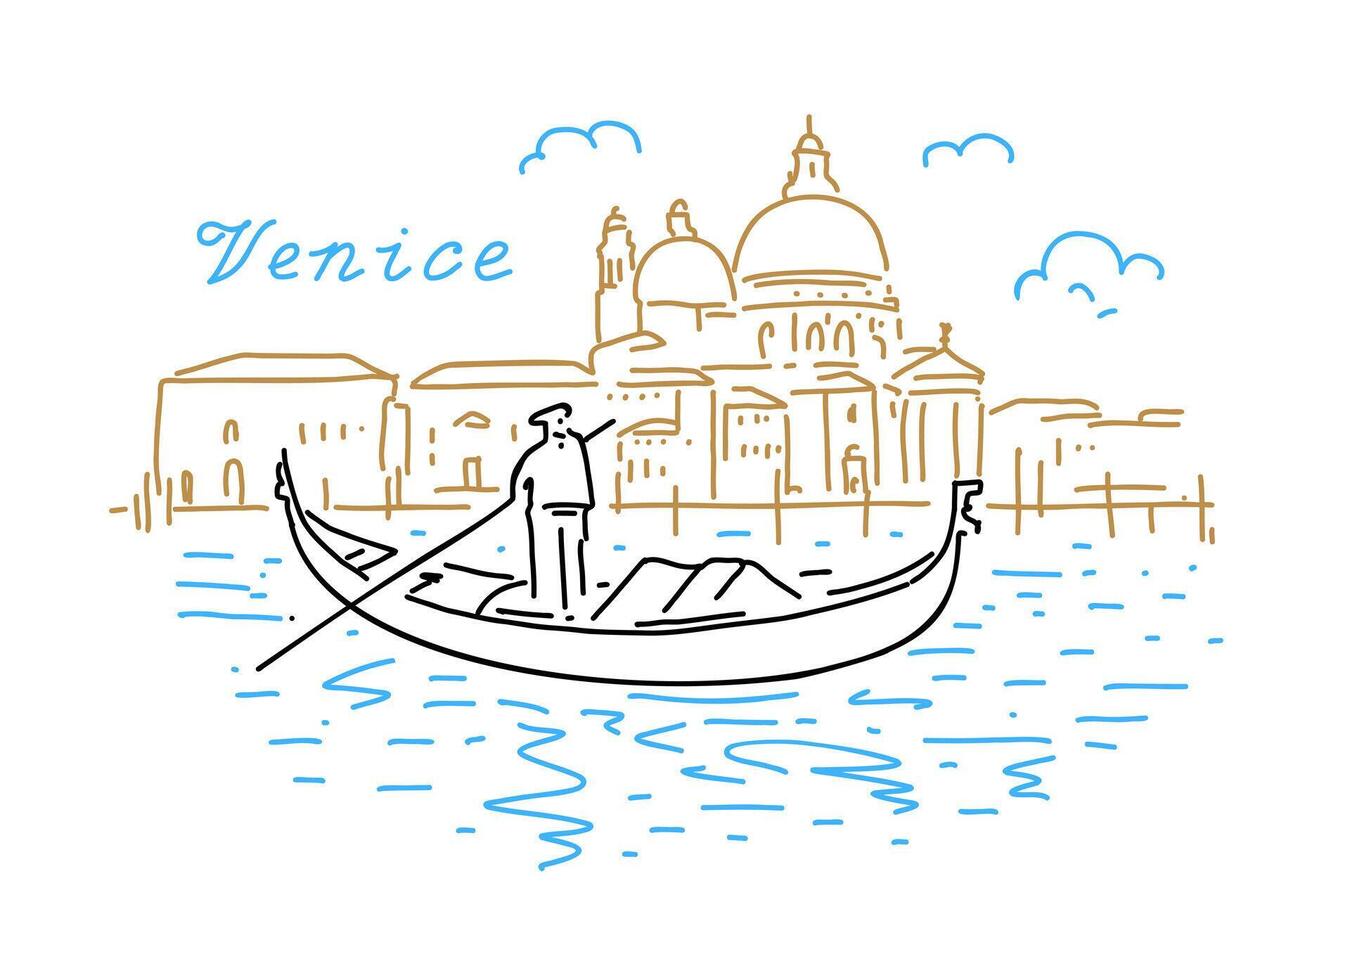 Architecture of Venice with a gondola on the water. hand drawn linear illustration vector